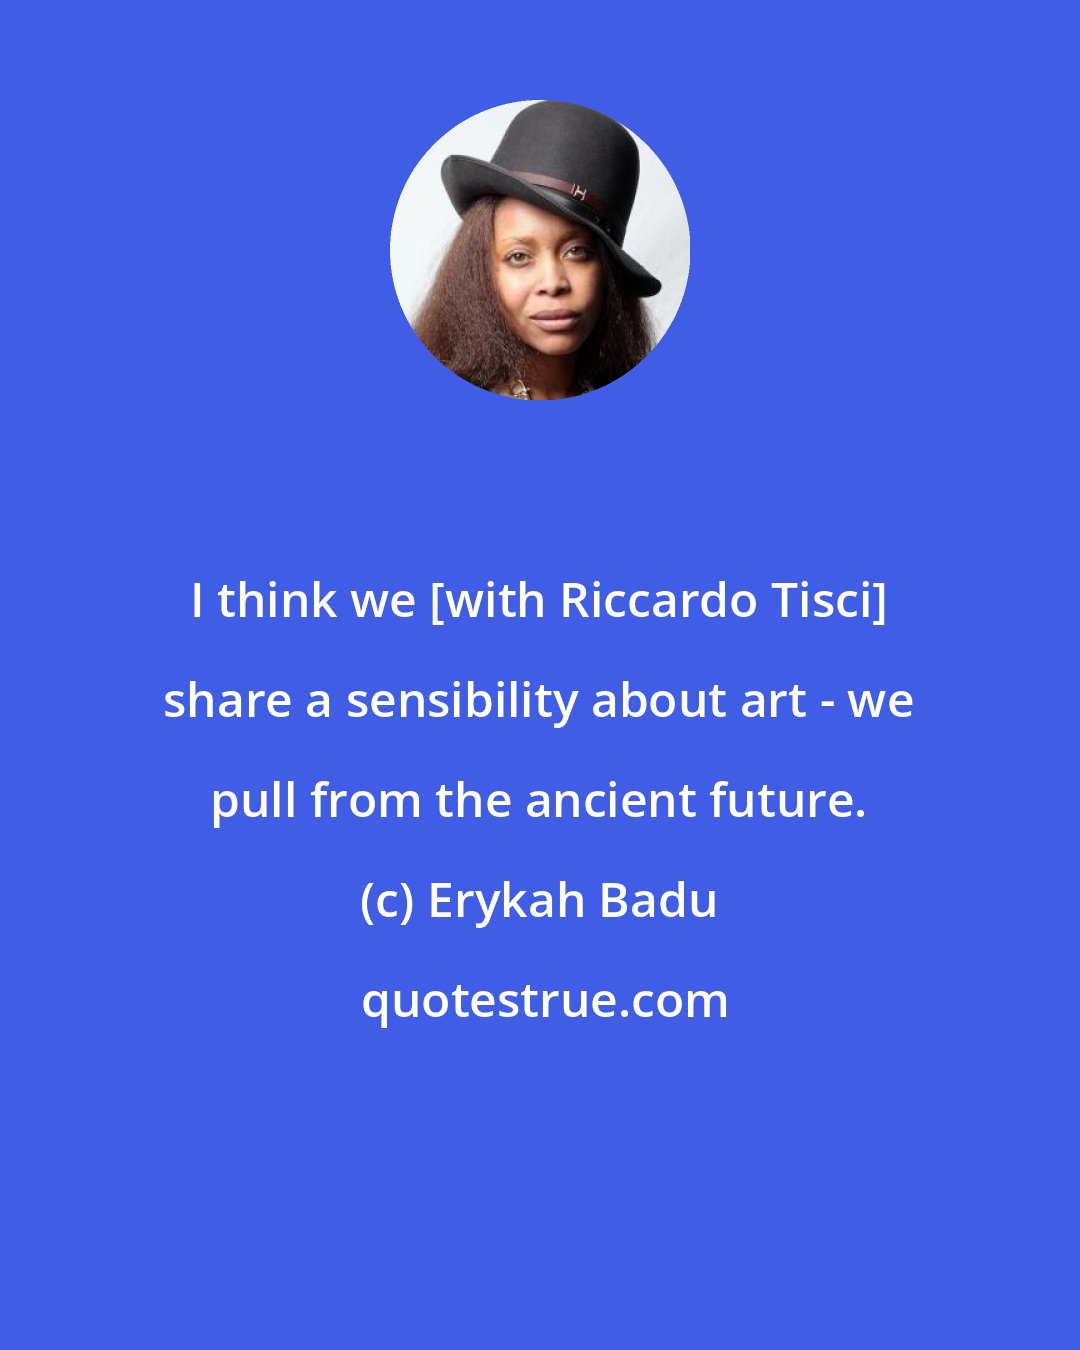 Erykah Badu: I think we [with Riccardo Tisci] share a sensibility about art - we pull from the ancient future.